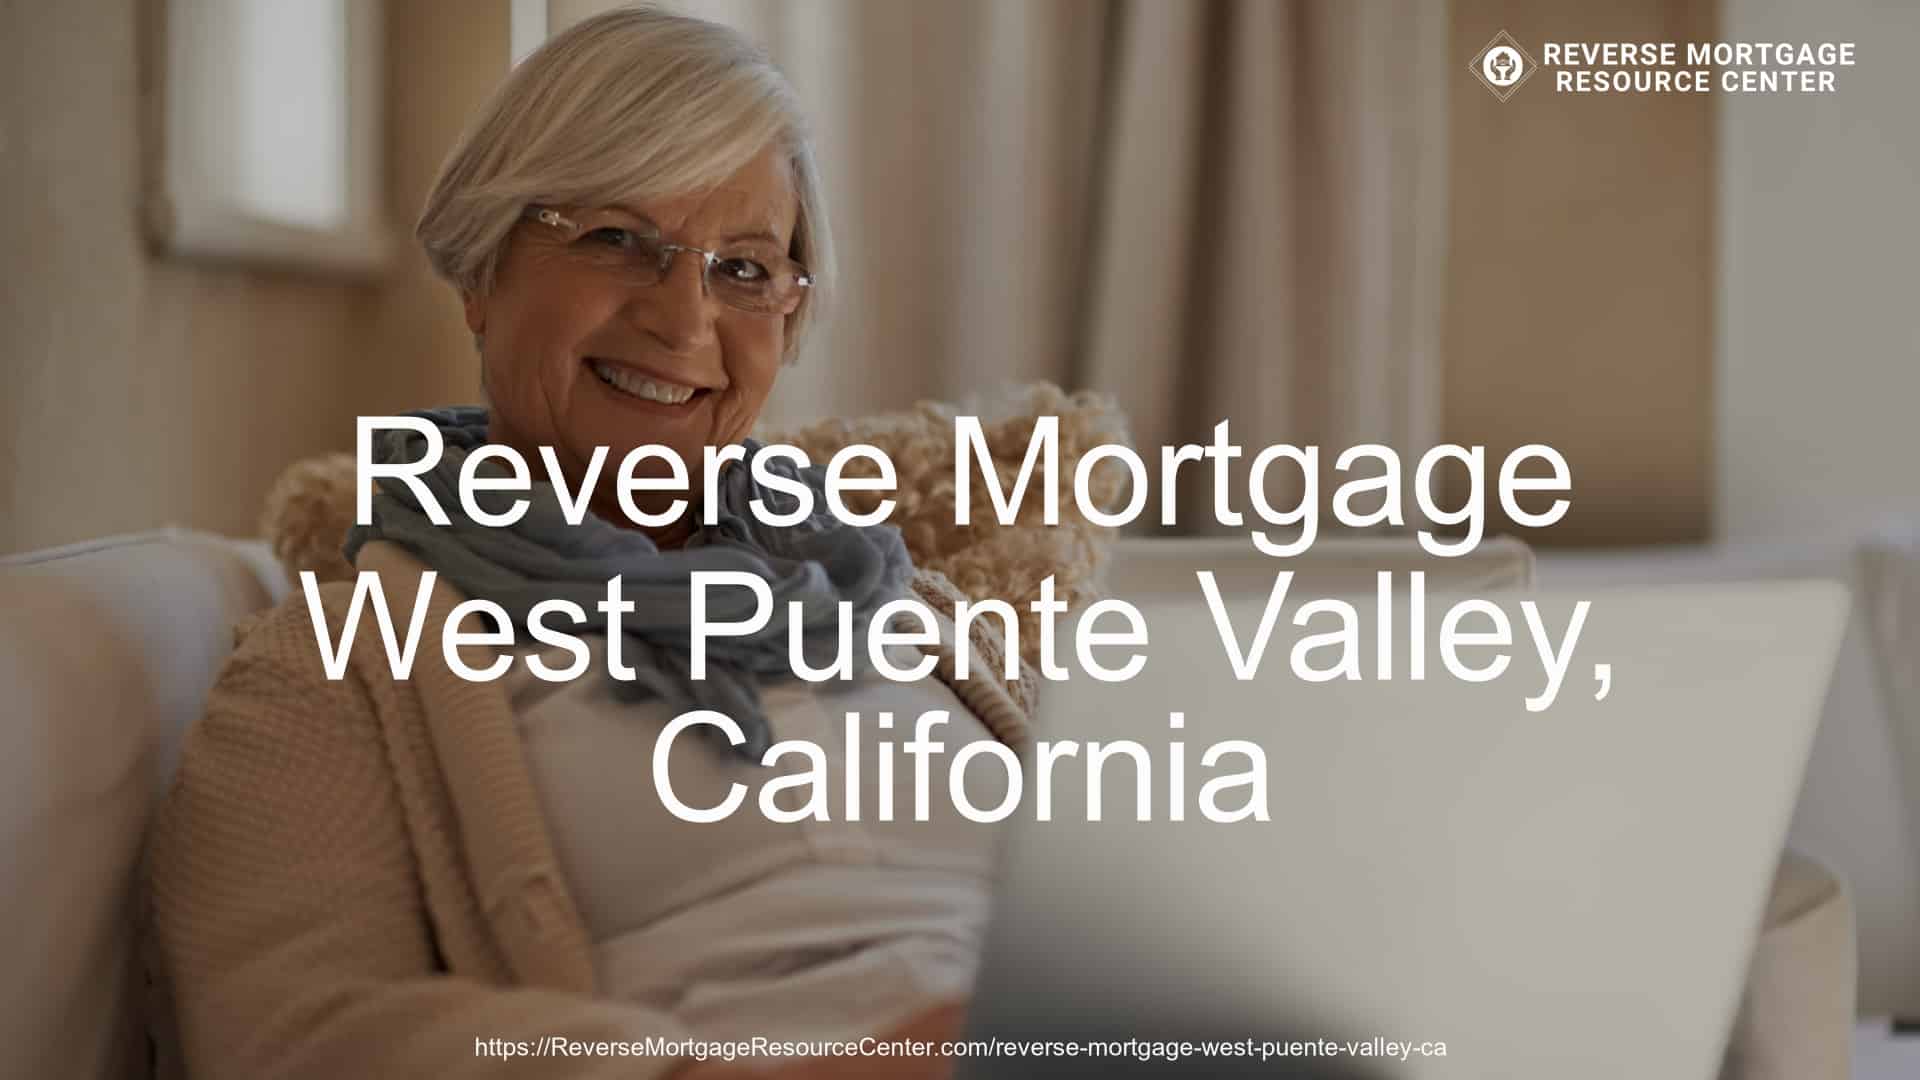 Reverse Mortgage Loans in West Puente Valley California